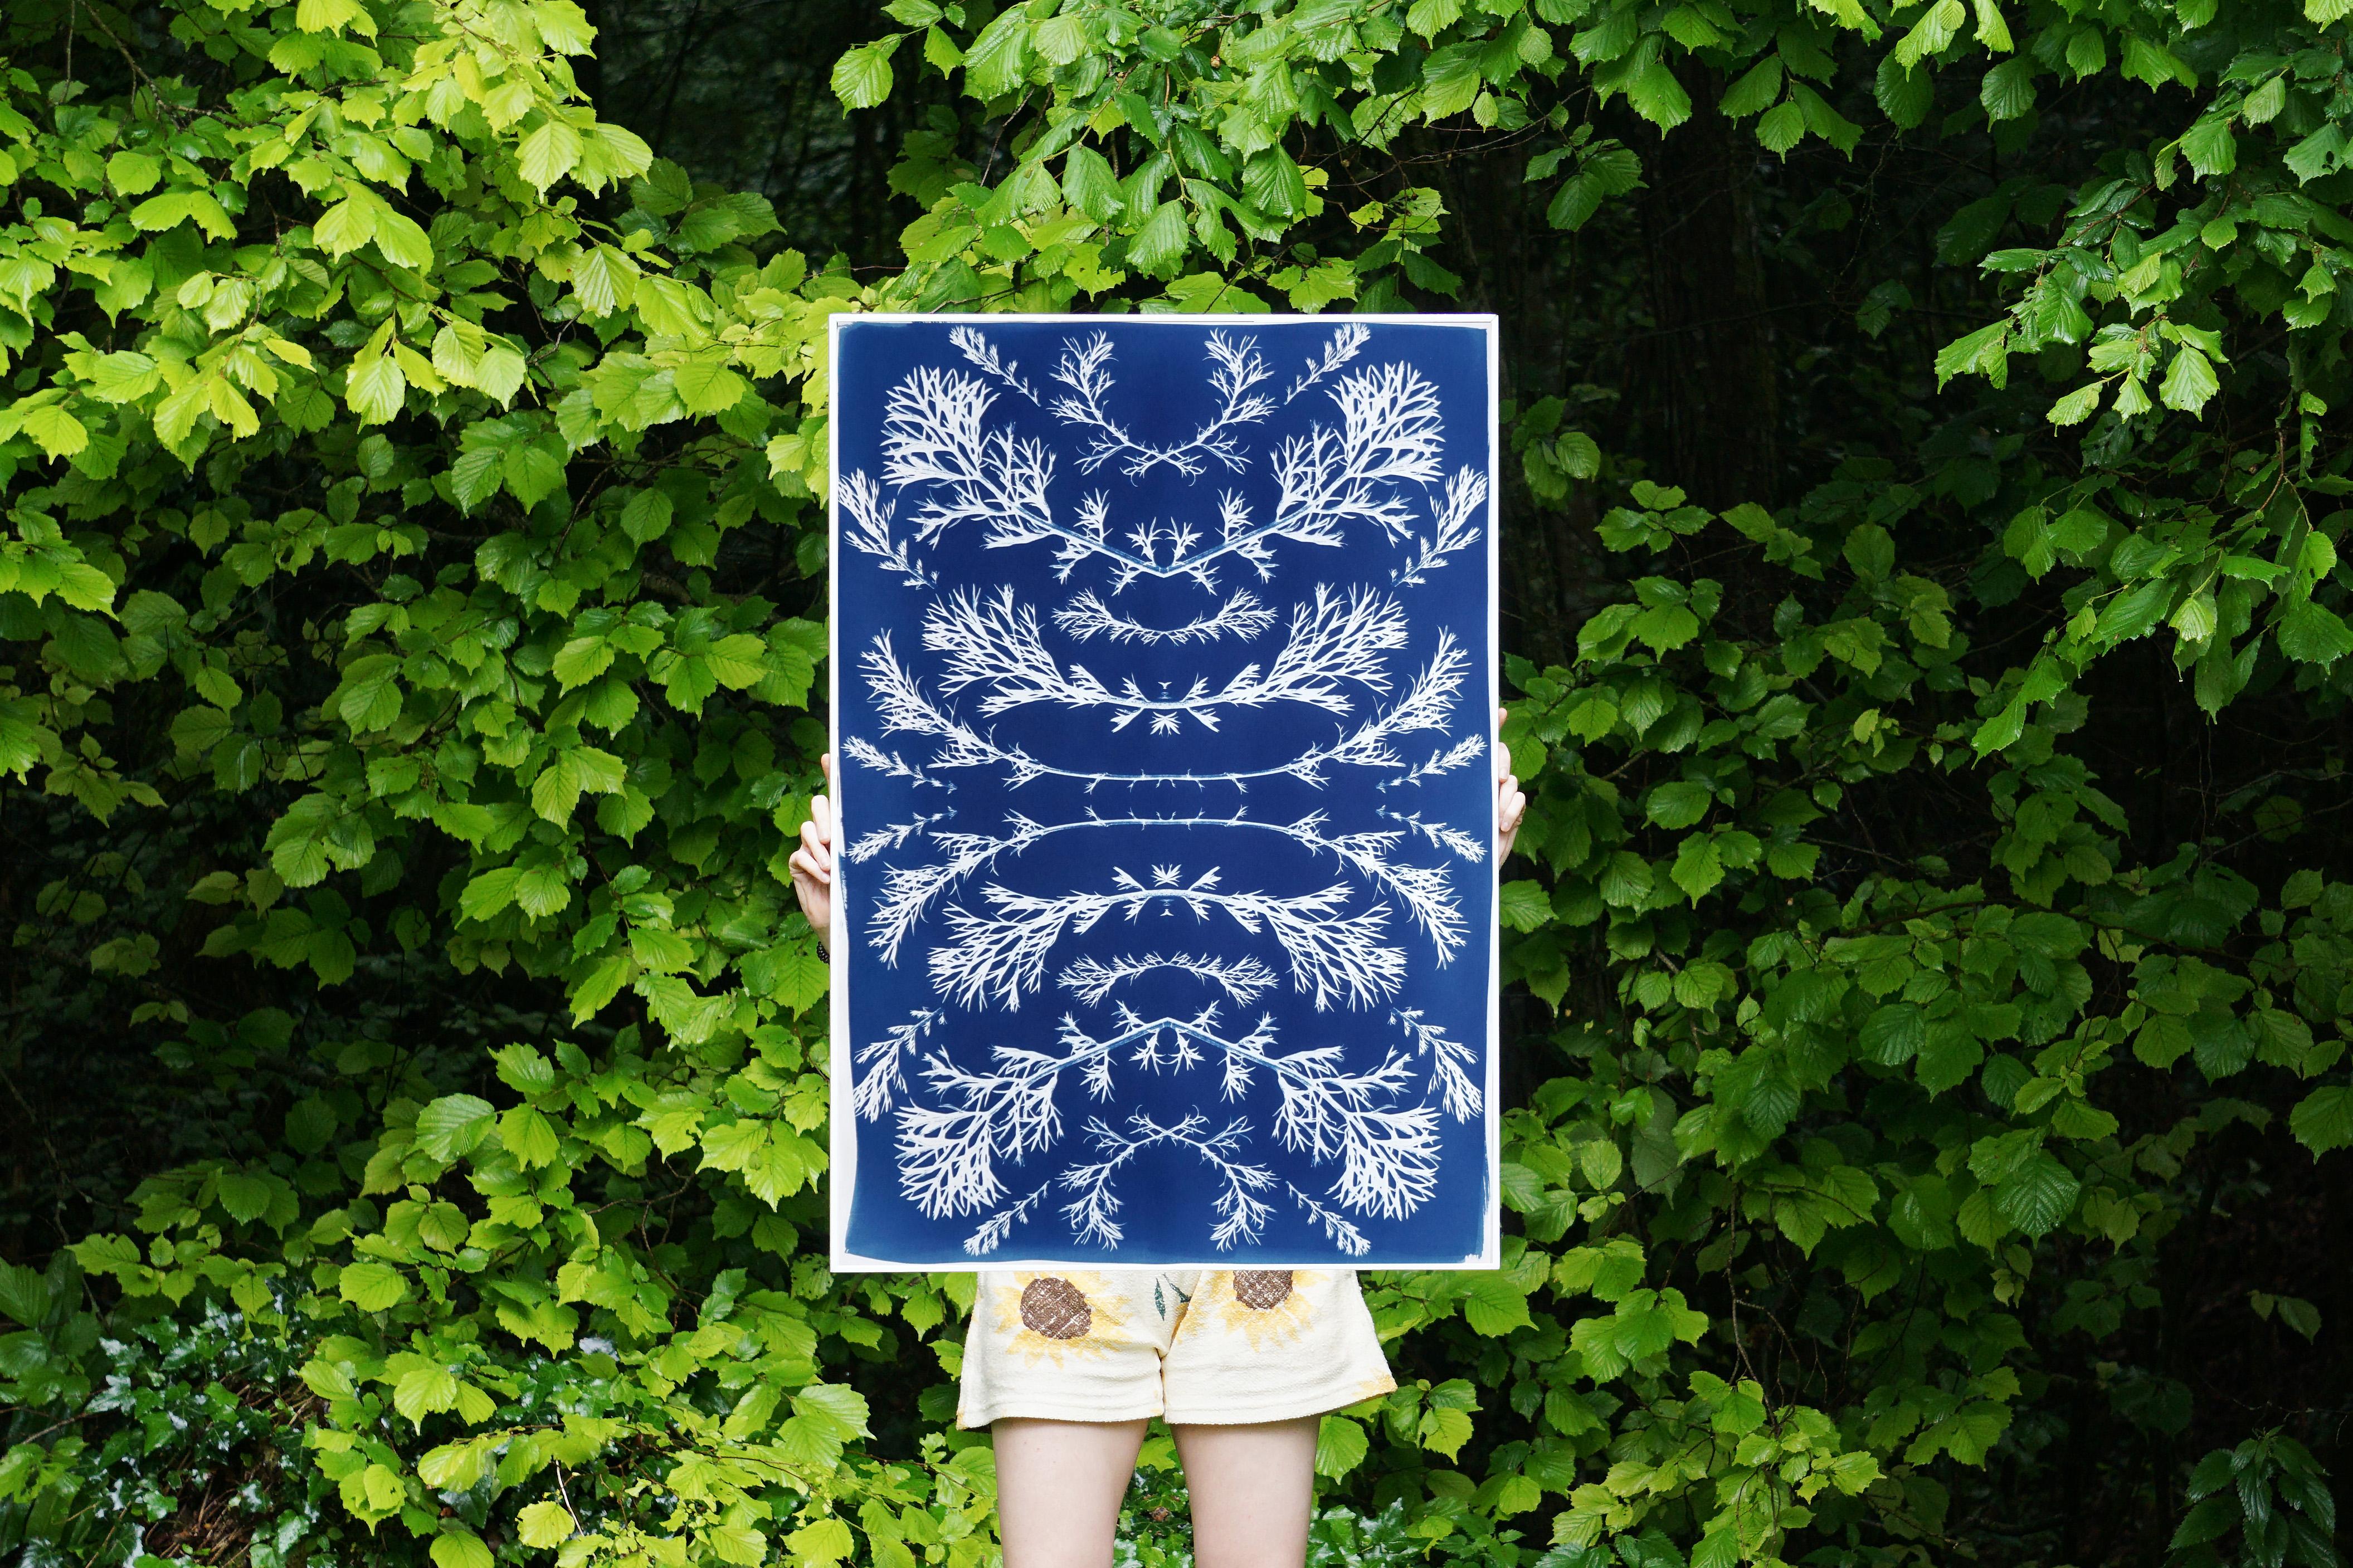 This is an exclusive handprinted limited edition cyanotype.

Details:
+ Title: Vintage Pressed Flowers Nº2
+ Year: 2021
+ Edition Size: 20
+ Stamped and Certificate of Authenticity provided
+ Measurements : 70x100 cm (28x 40 in.), a standard frame